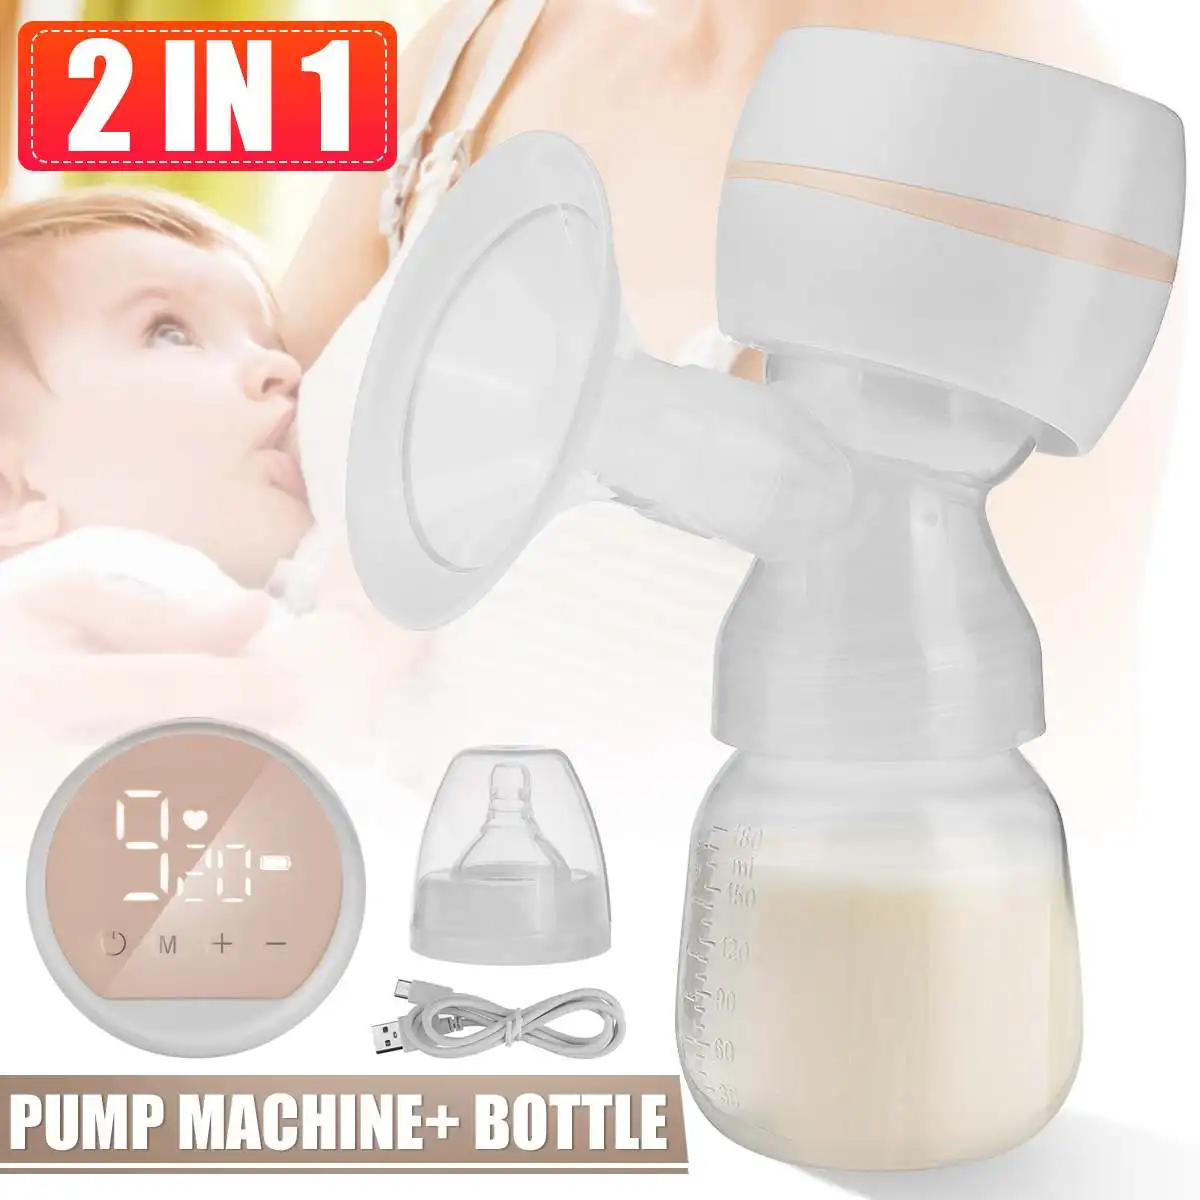 2IN1 Electric Breast Pump Painless Breast Massager Portable Mute Lactation Milk Feeding Collector BPA free Breastfeeding Bottle